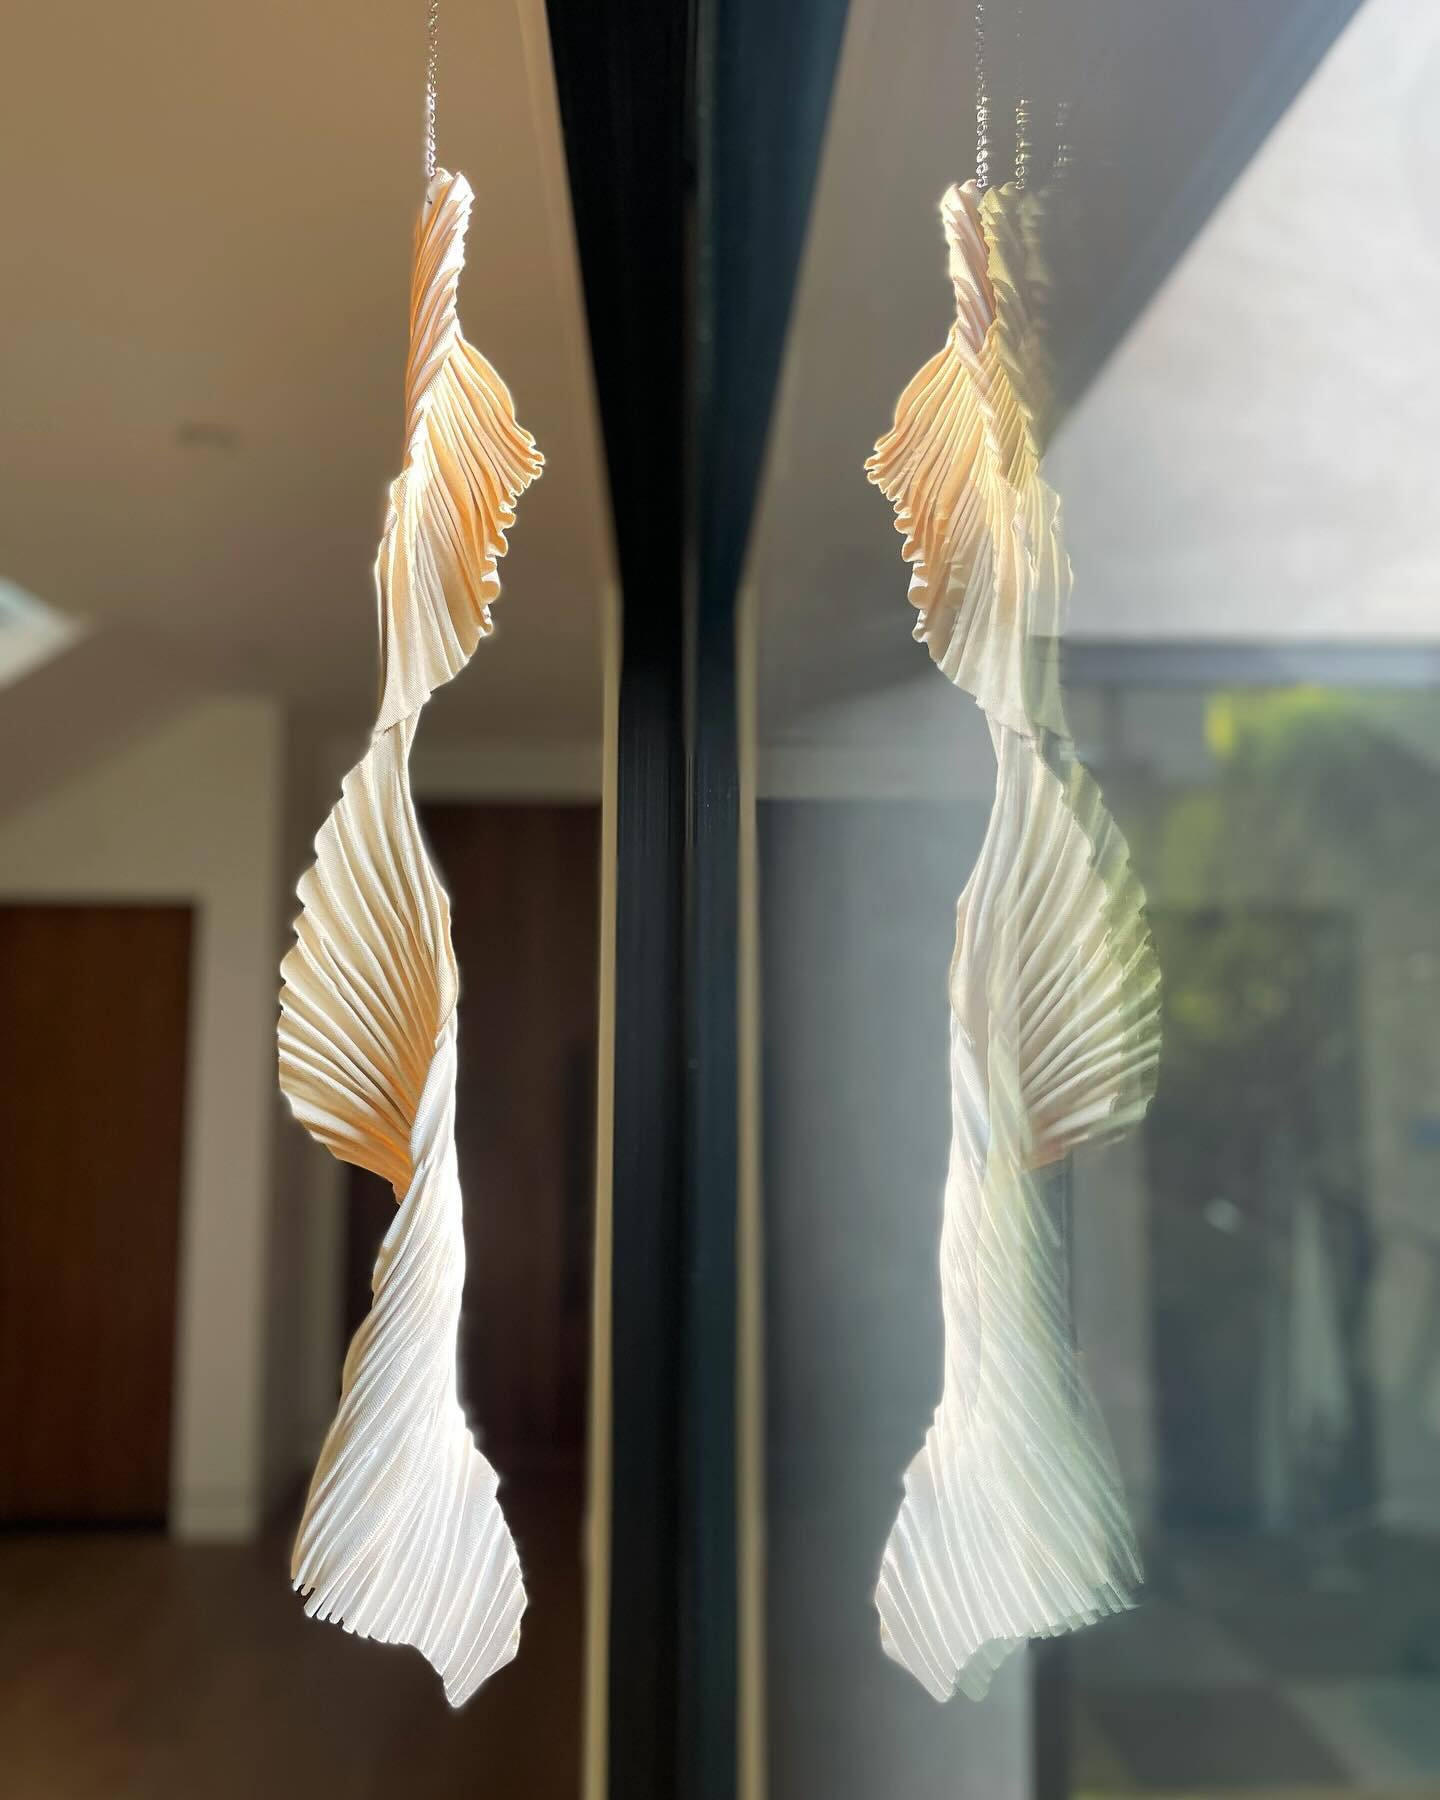 I love playing with reflection and light 🔆&hellip;

#reflection #sculpture #contemporaryart #hangingsculpture